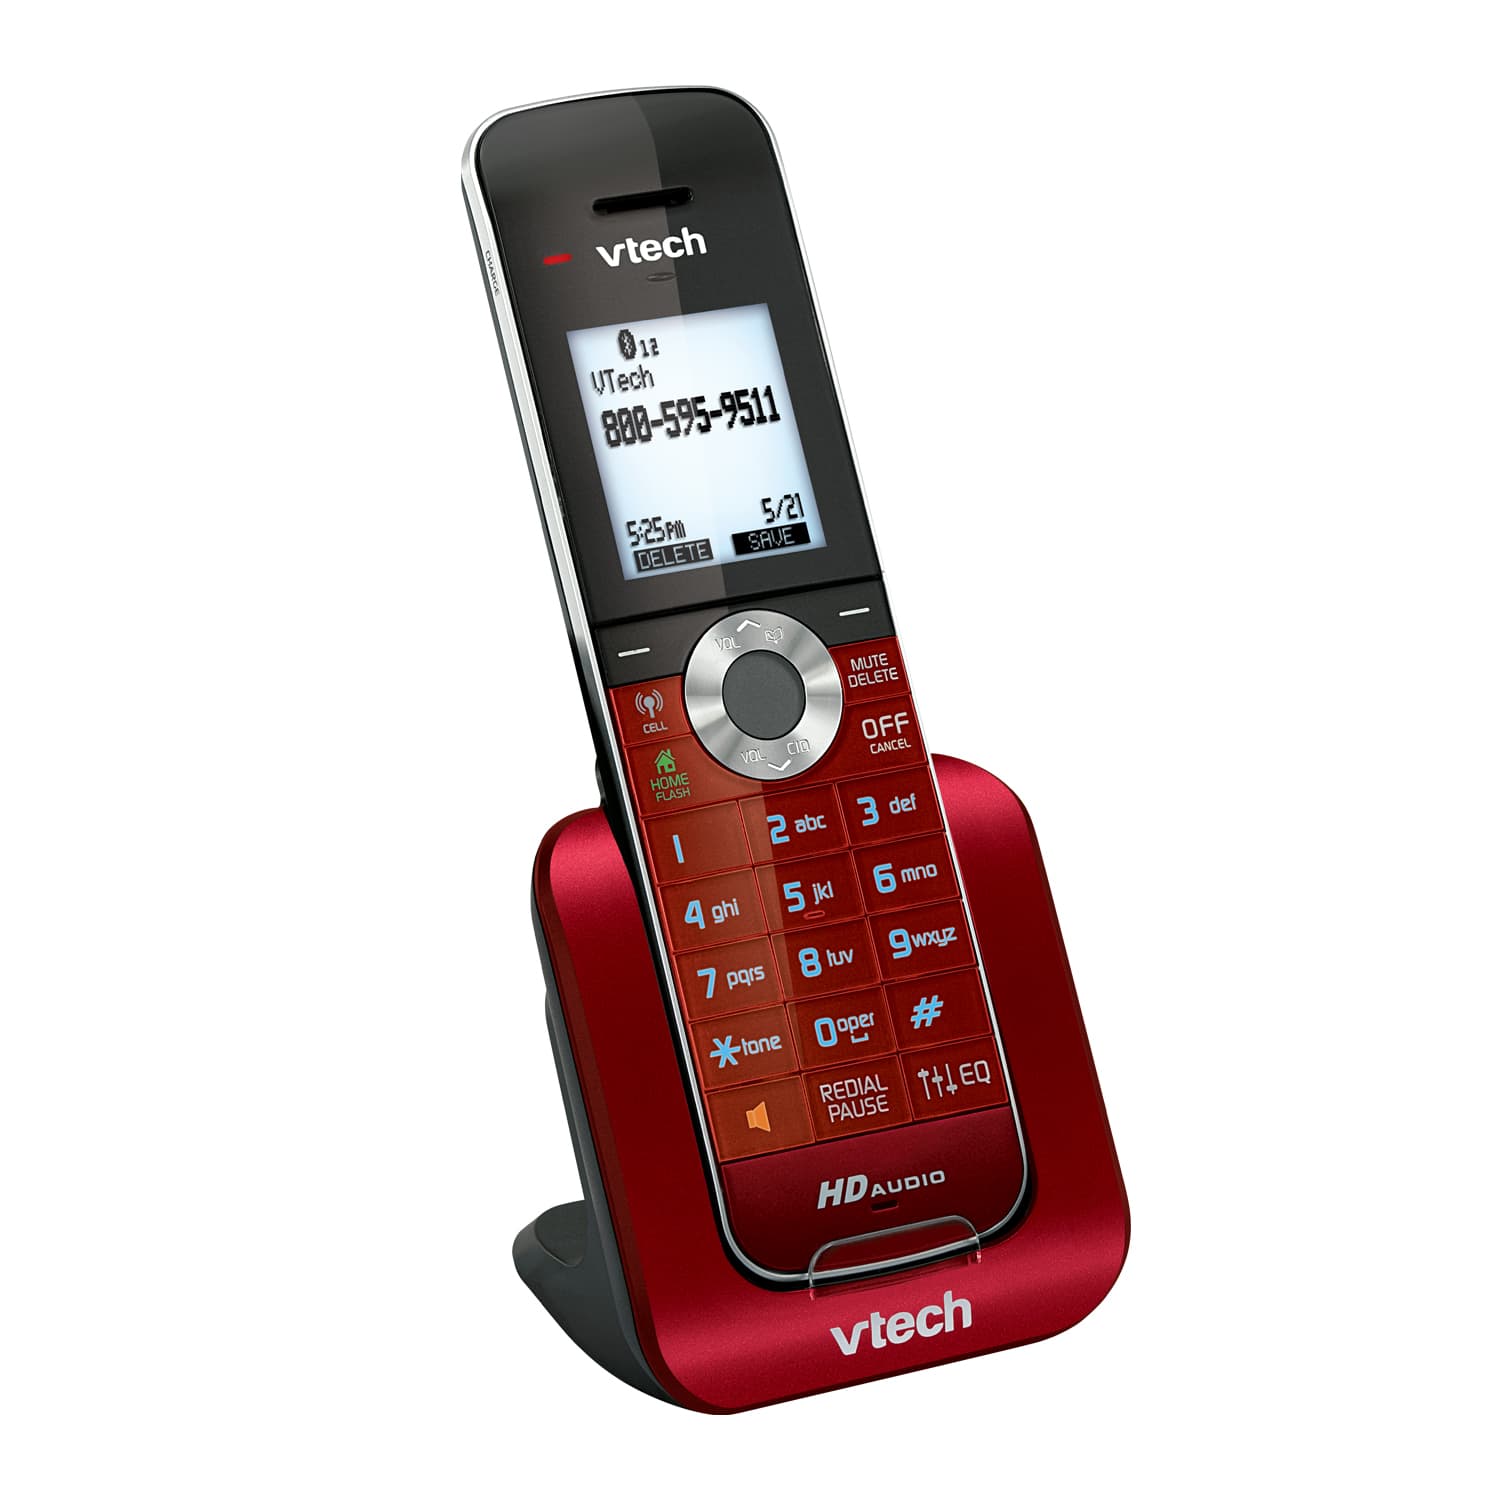 3 Handset Connect to Cell™ Answering System with Caller ID/Call Waiting - view 10